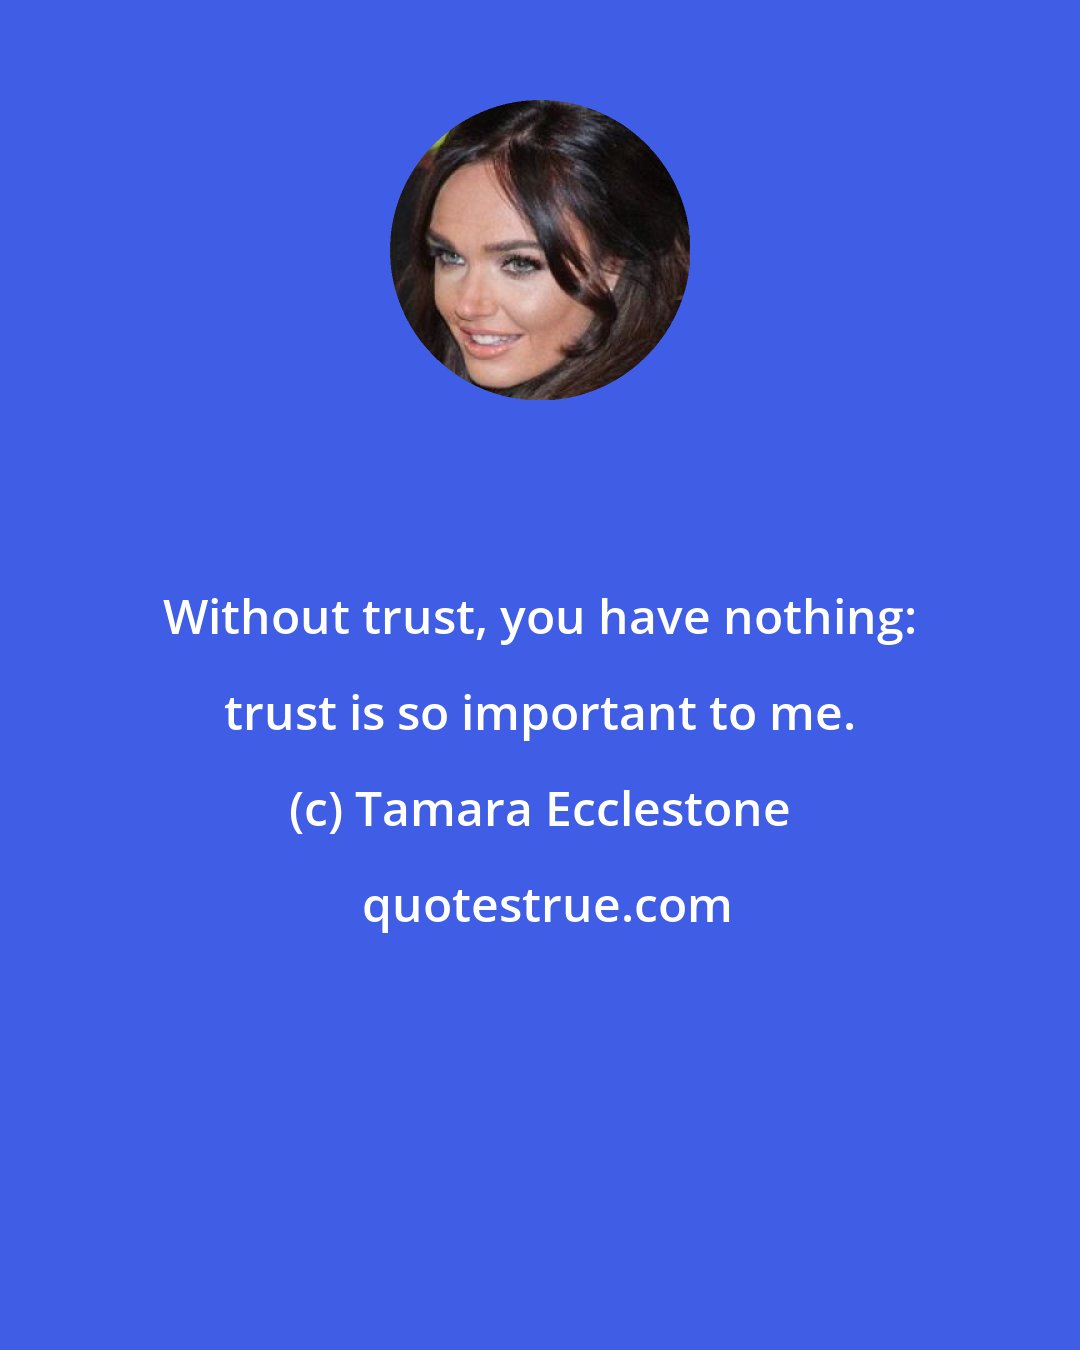 Tamara Ecclestone: Without trust, you have nothing: trust is so important to me.